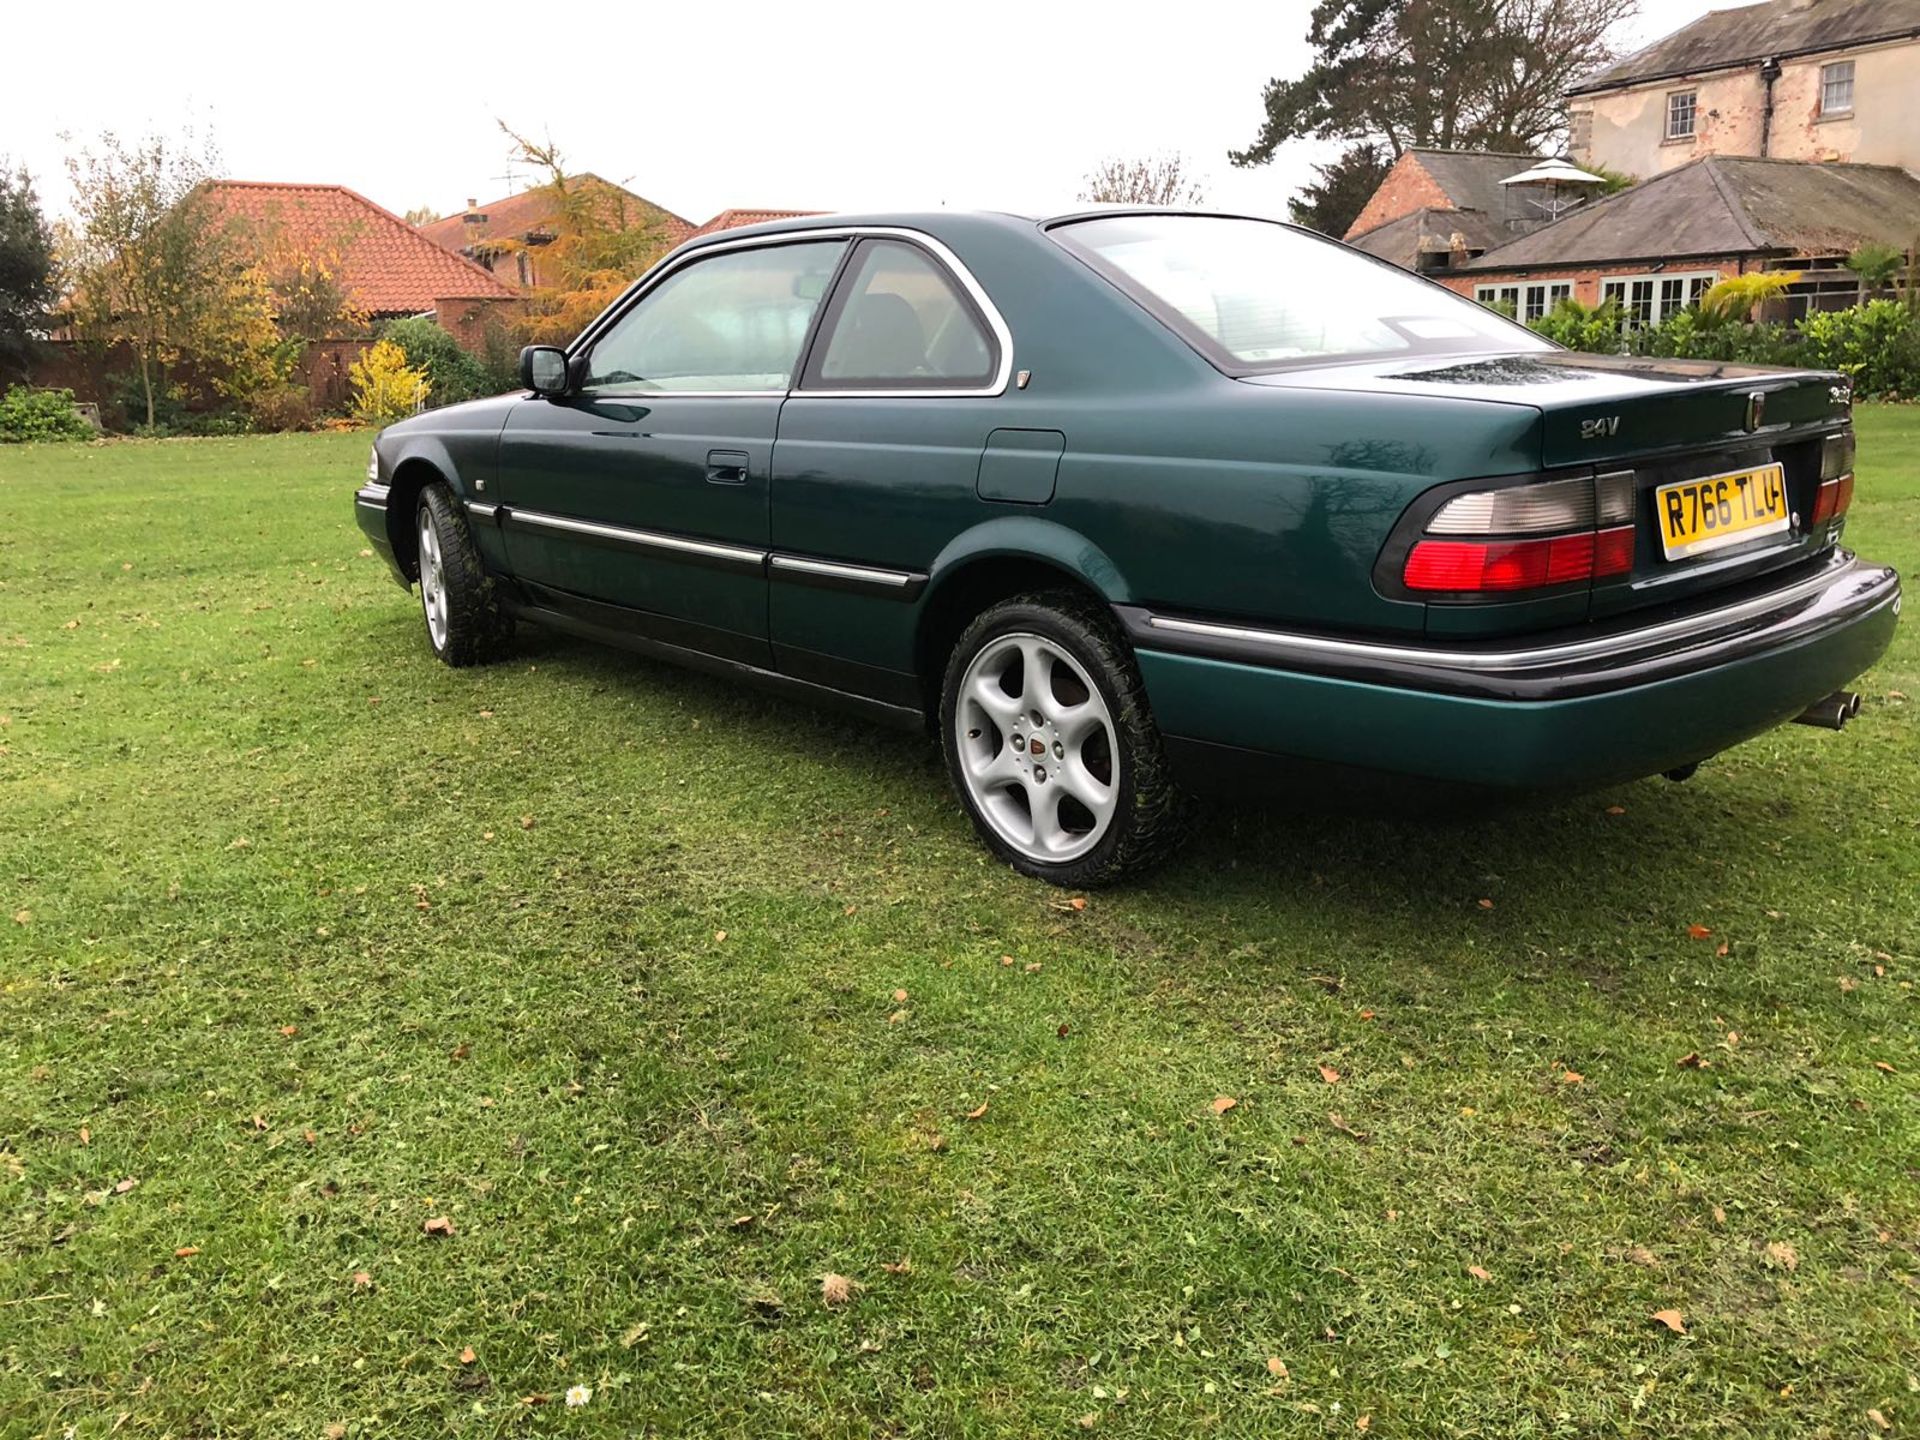 1997/R REG ROVER 825 STERLING COUPE 2.5 PETROL AUTOMATIC GREEN *NO VAT* - Image 3 of 28